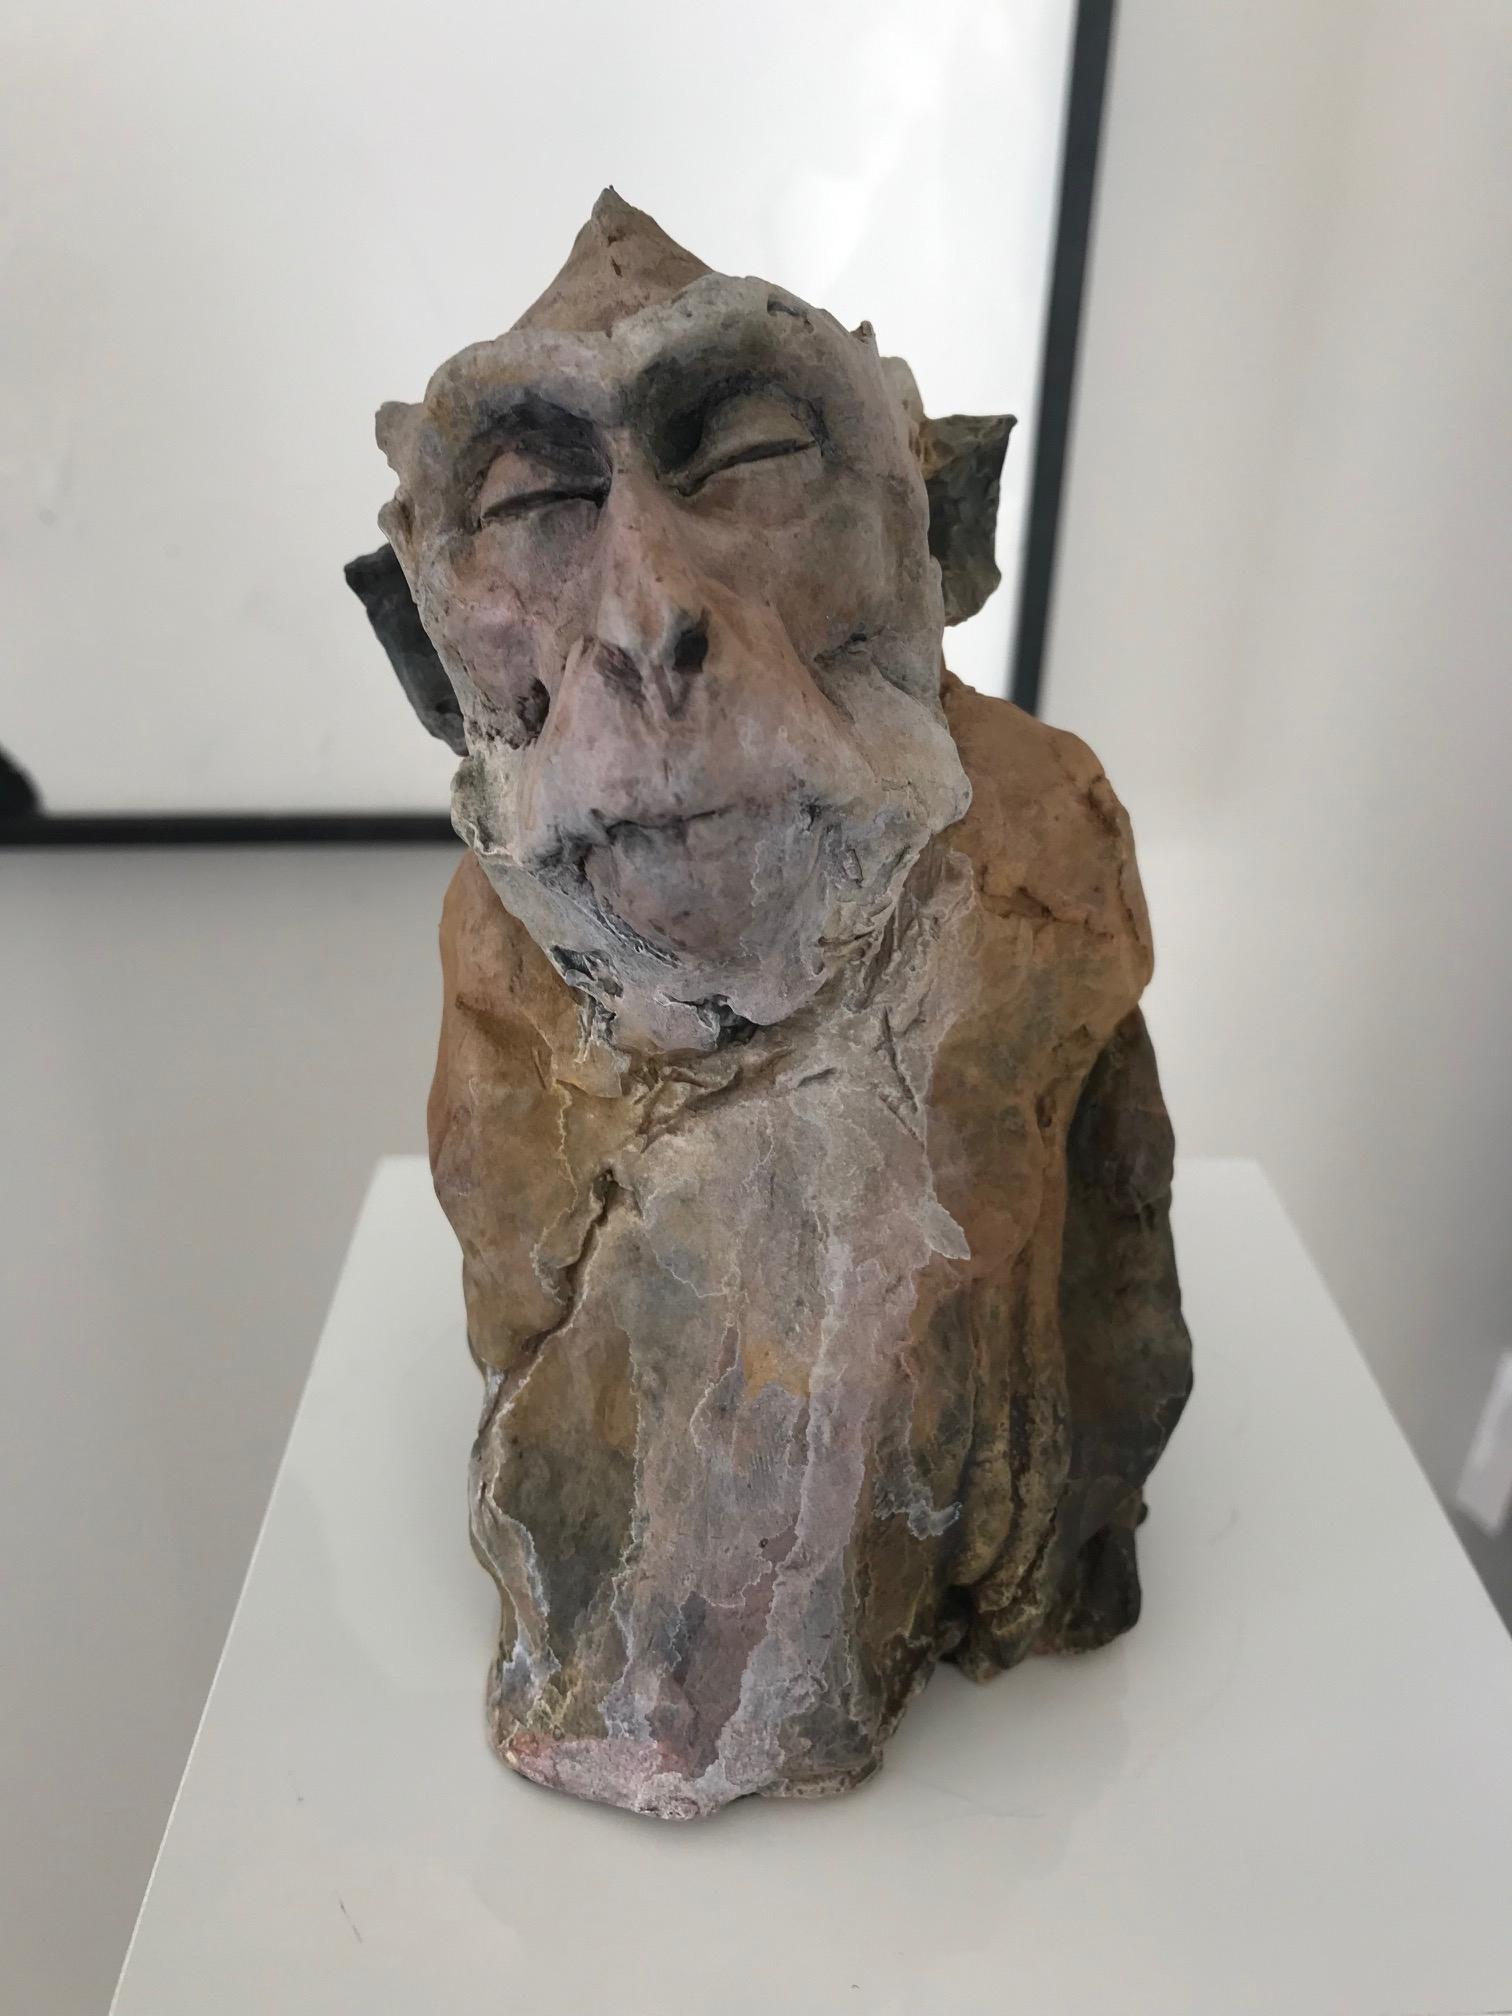 Nichola Theakston (1967) has established herself as one of the UK’s foremost contemporary sculptors working within the animal genre. 

With the ''Monkey Sketch 4'' Nichola shows how exquisite she can capture the feelings and expressions in an